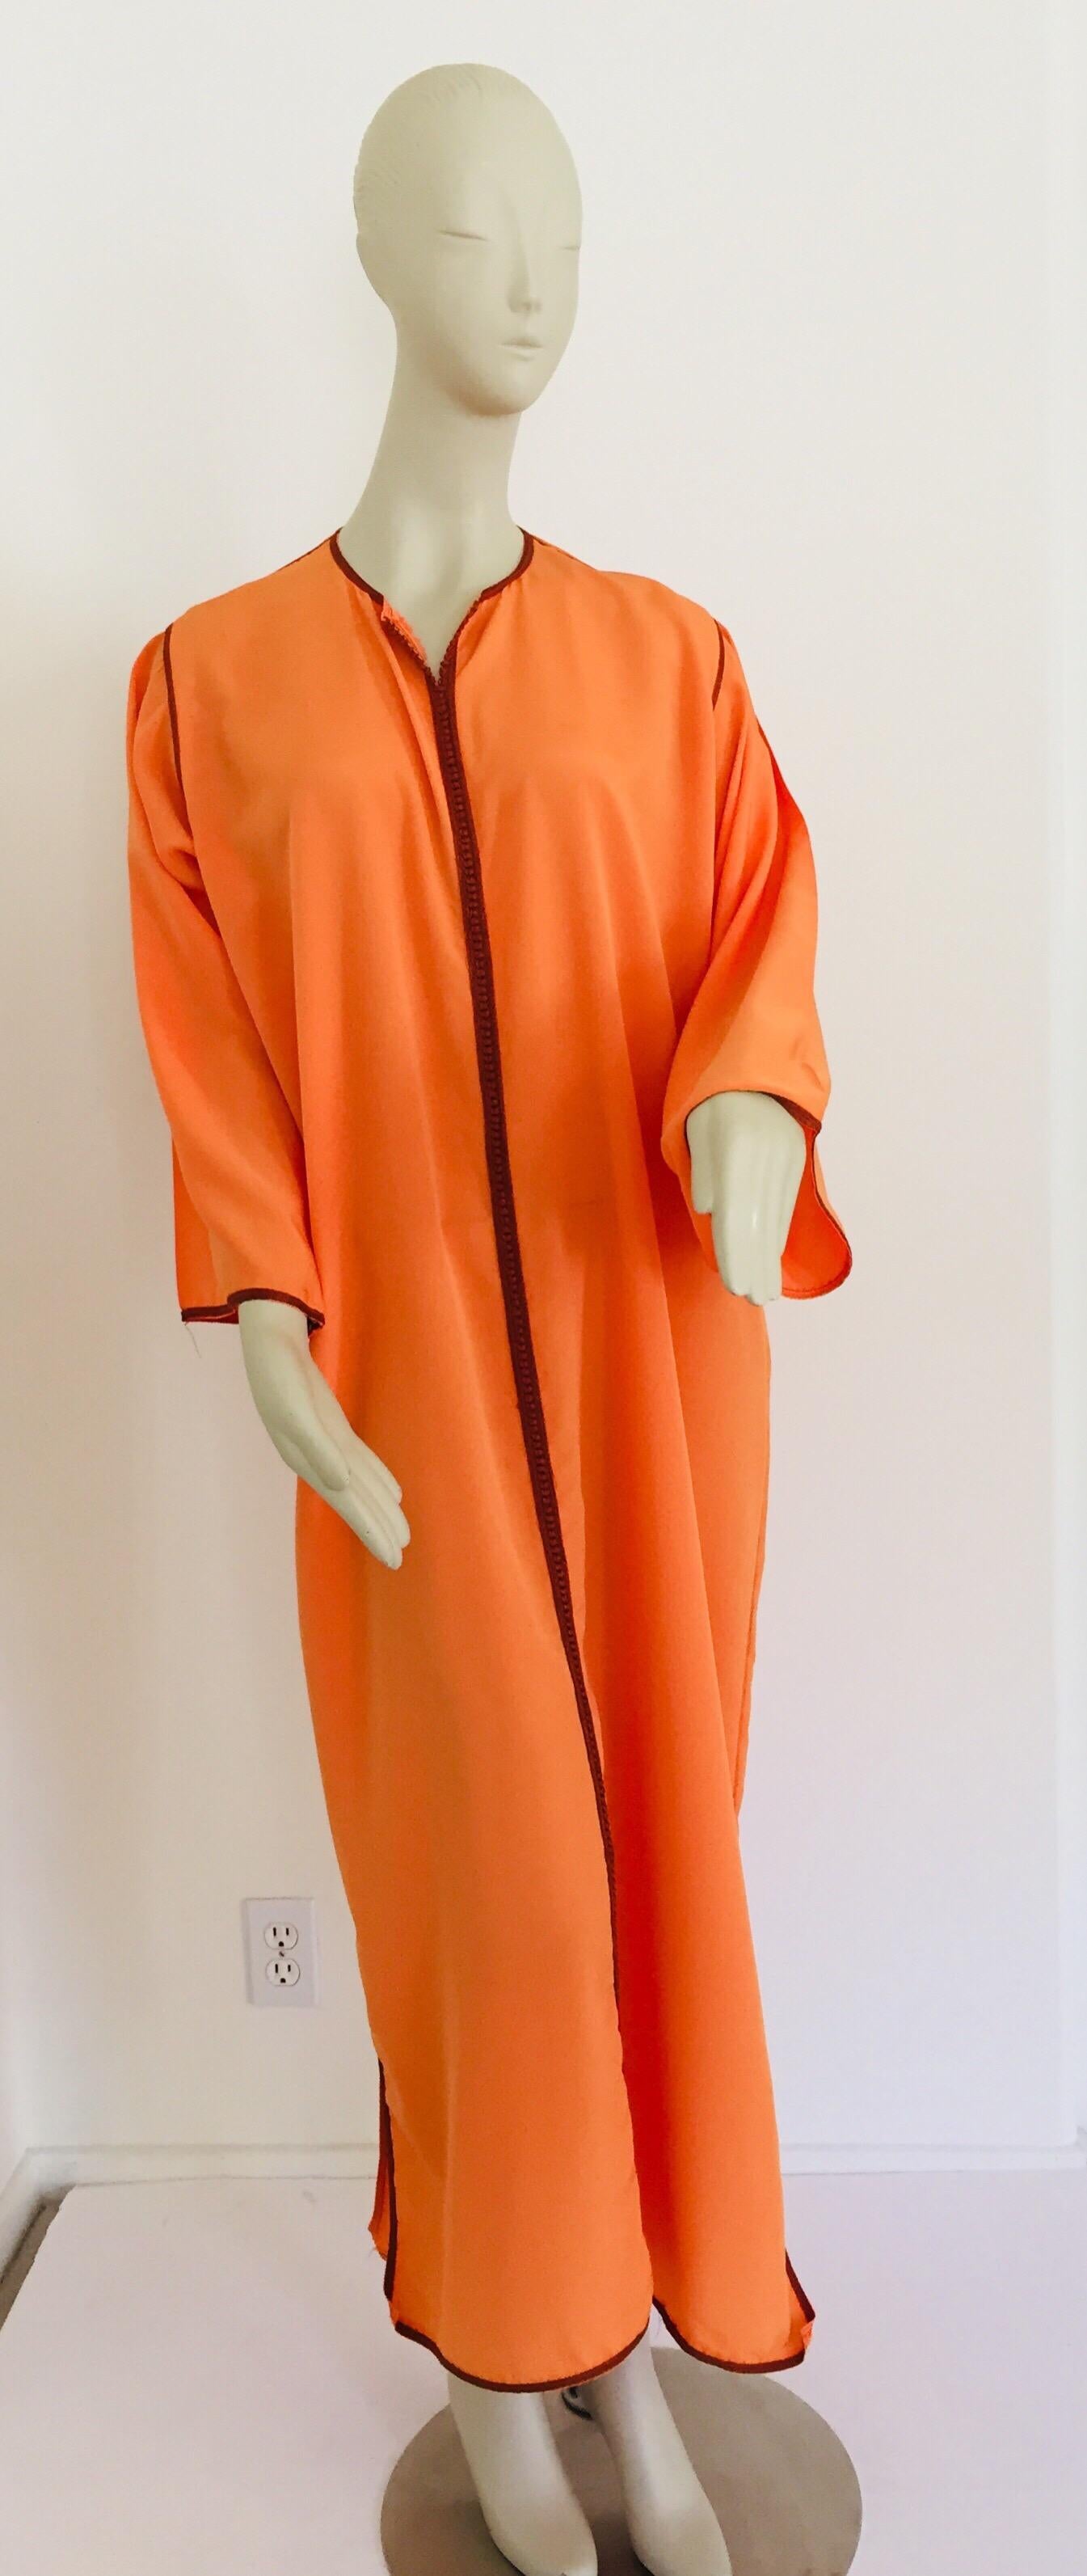 Elegant Moroccan caftan orange color with embroidered trim,
circa 1970s.
Caftan Gown, Tangerine
Round contrast neckline; button-loop placket.
Long bell sleeves.
Relaxed silhouette.
Straight skirt and hem.
This long maxi dress kaftan trim is